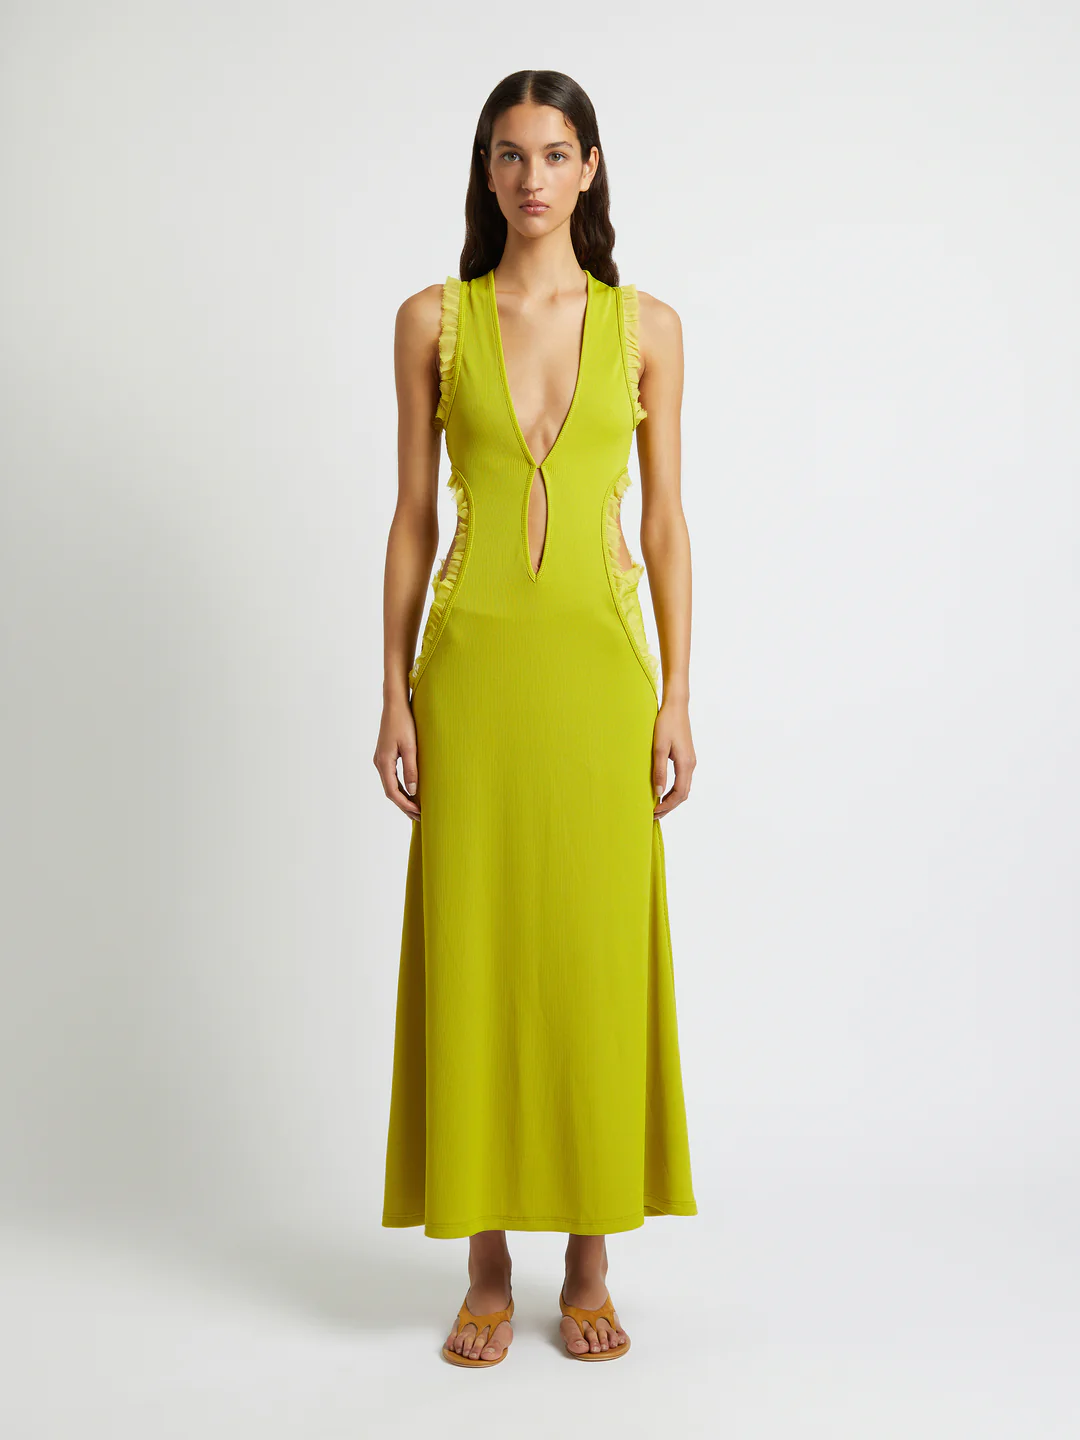 Christopher Esber Carina Plunge Dress in Limeade available at The New Trend Australia.